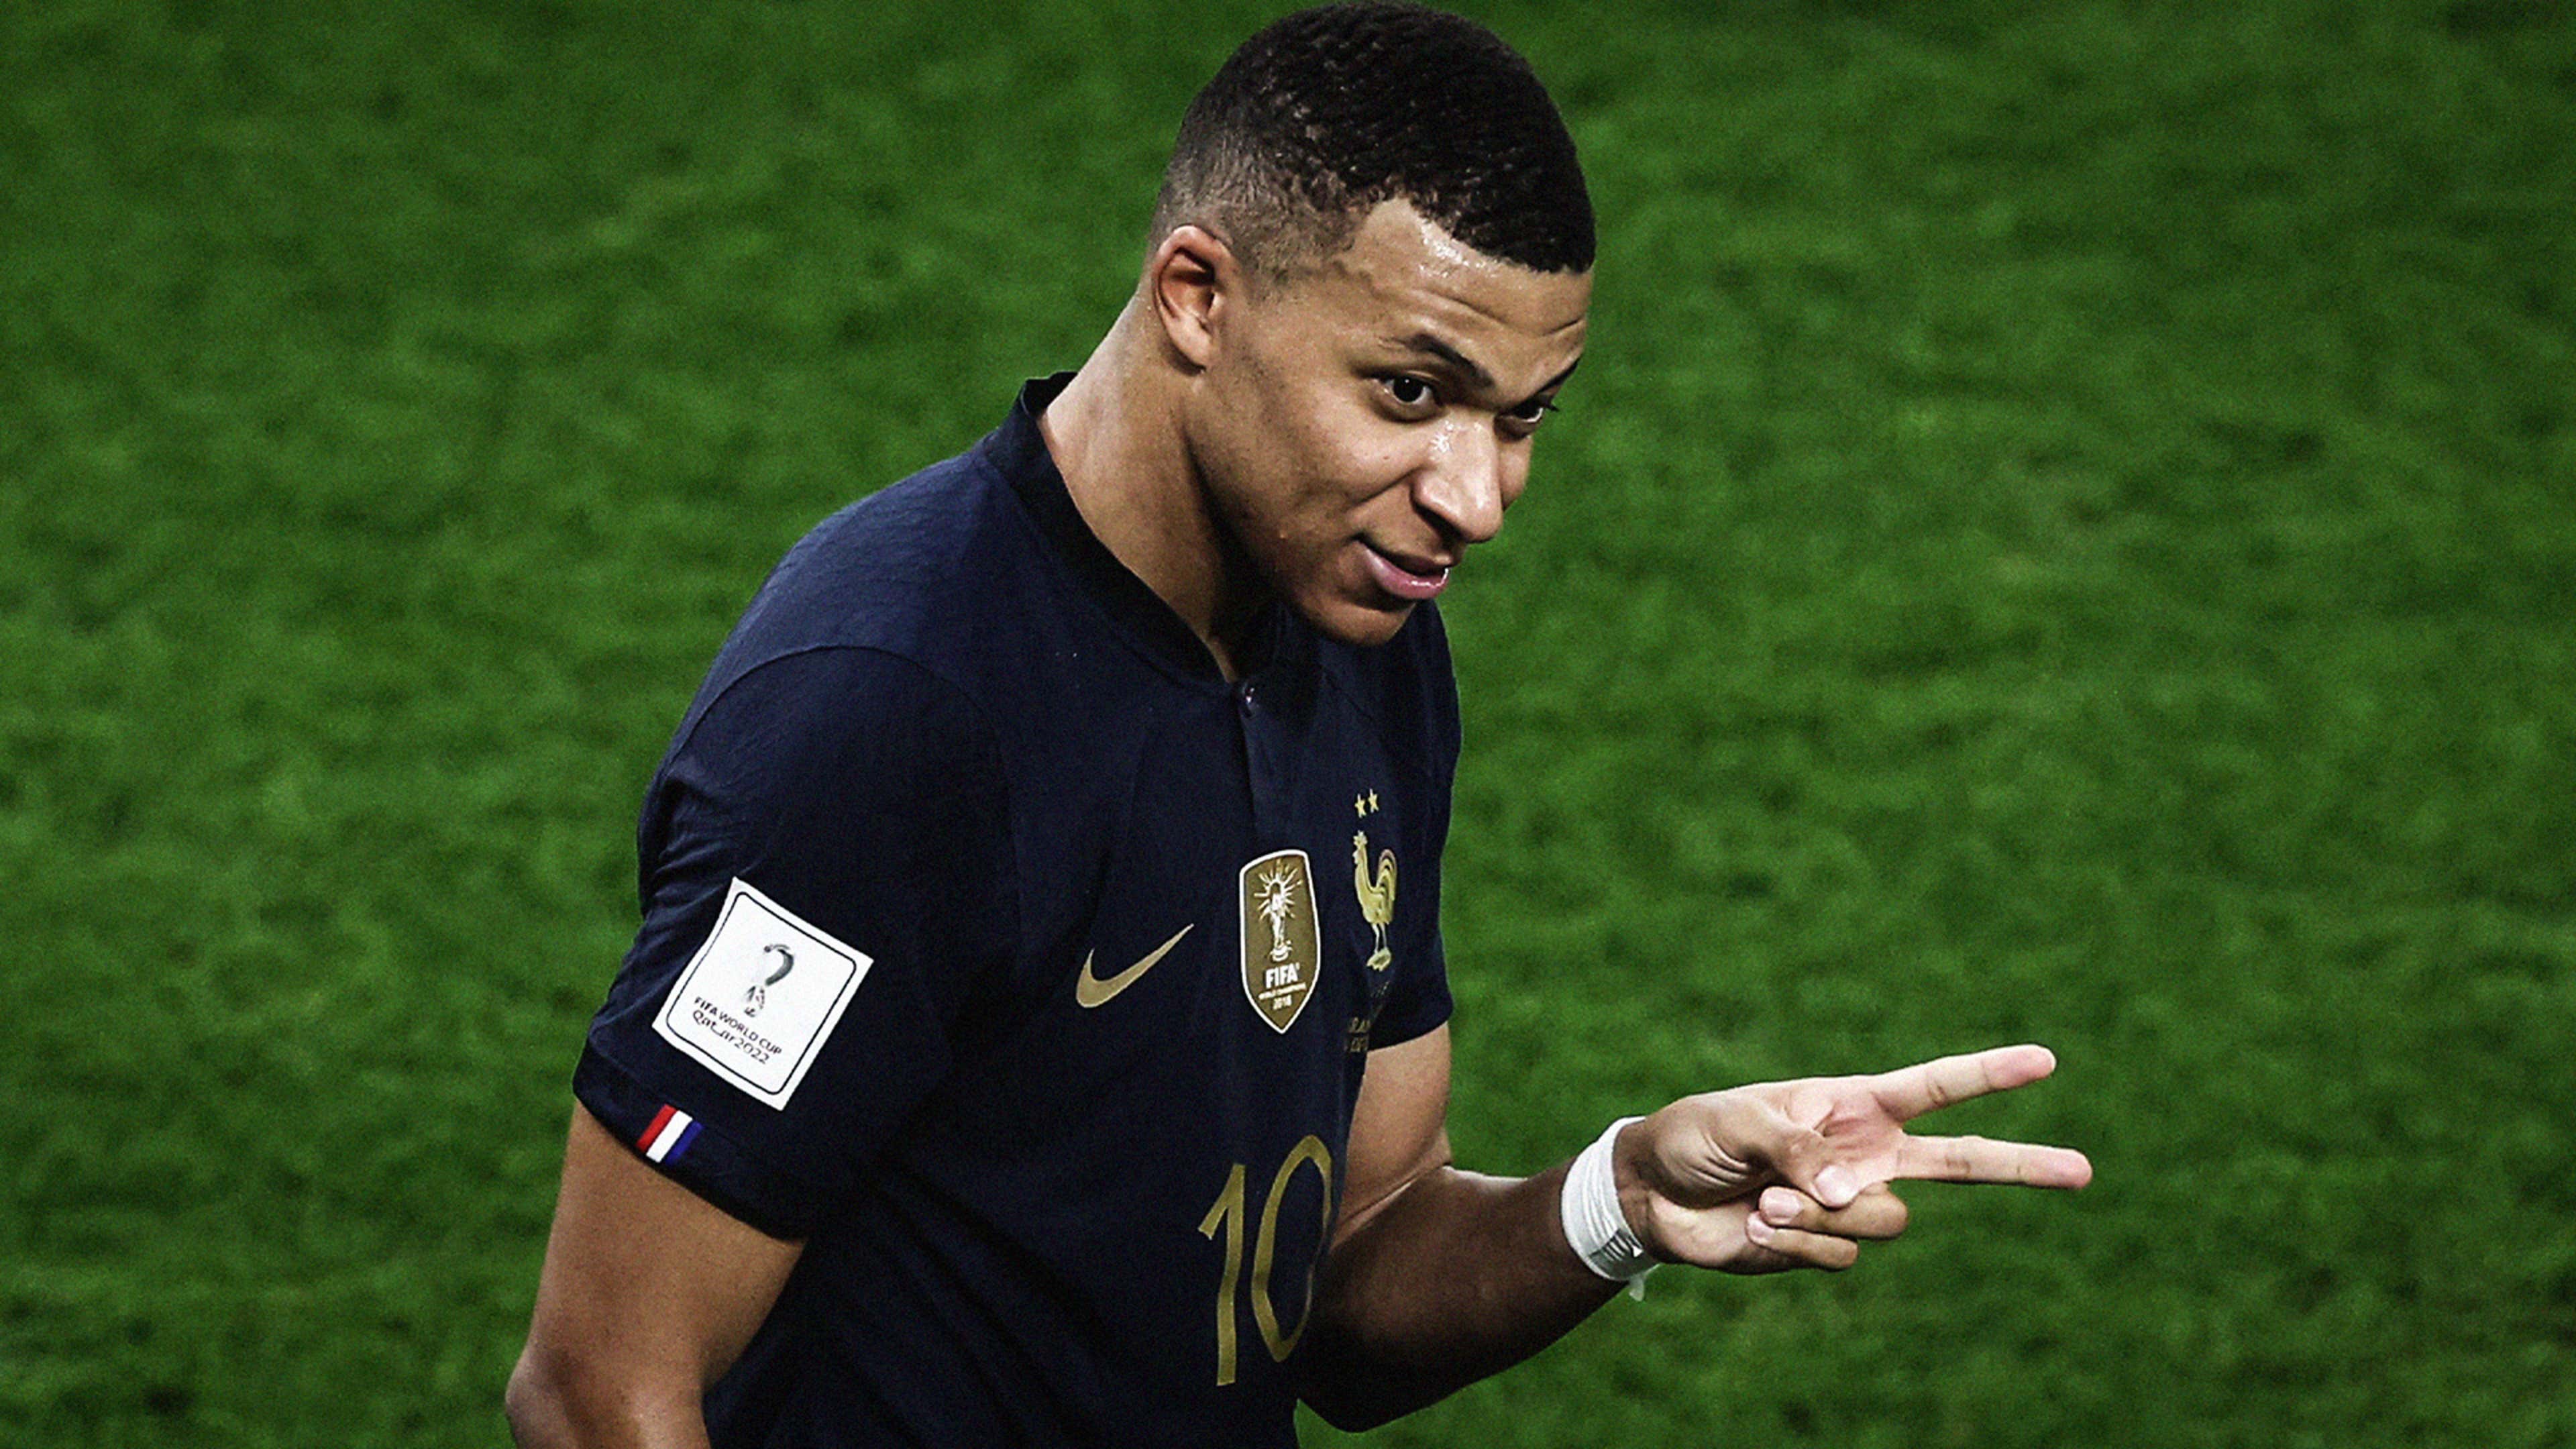 Kylian Mbappé closes in on all-time Top Ten